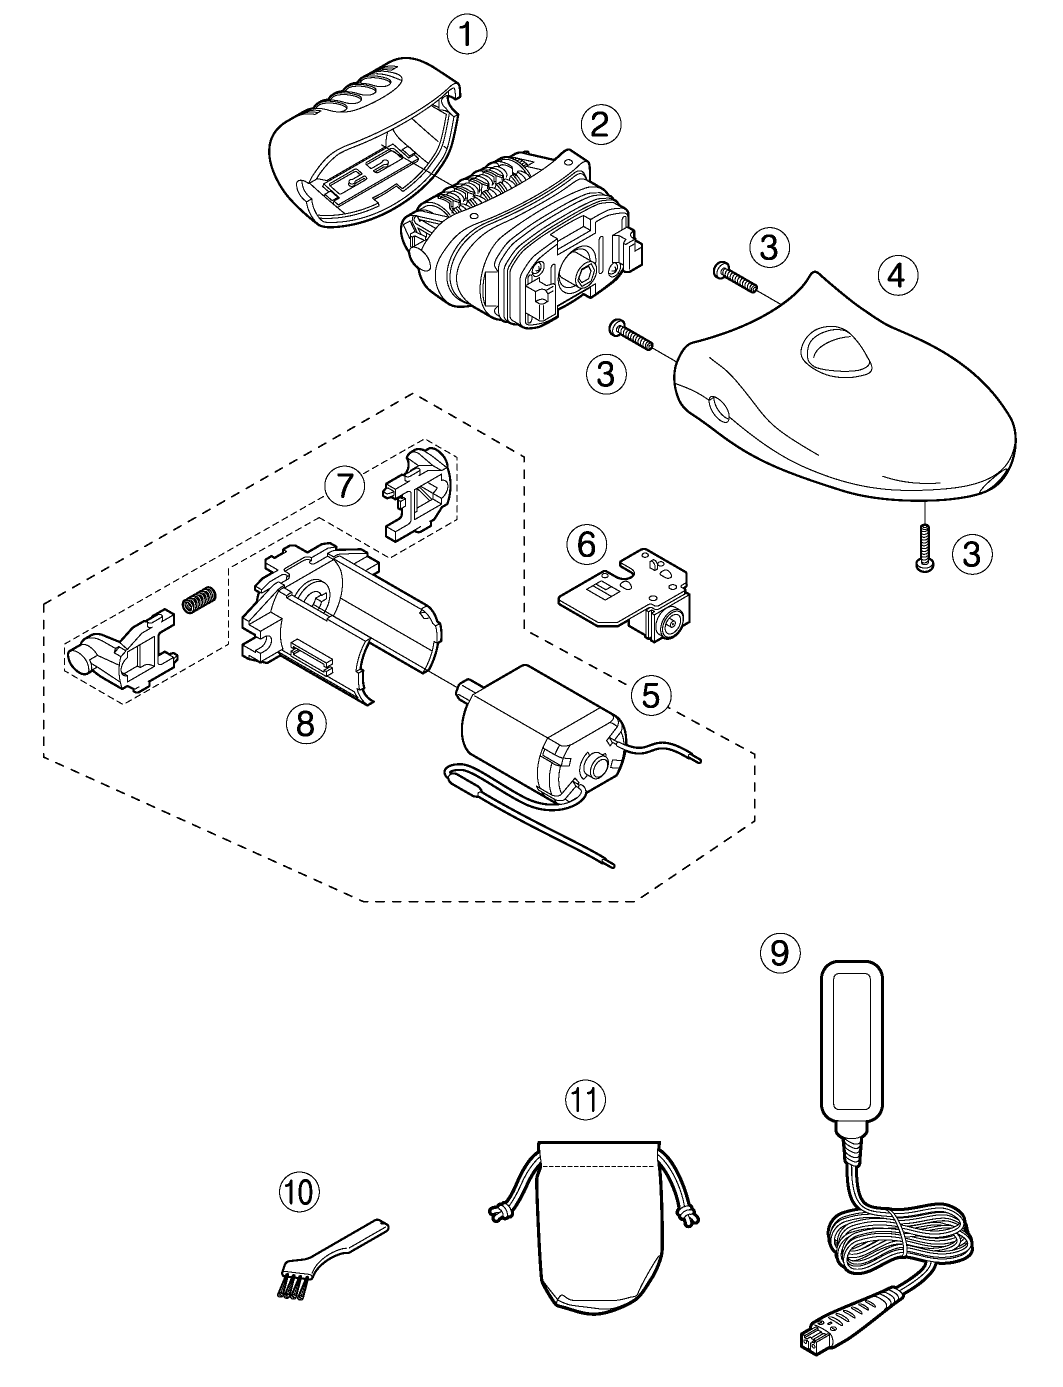 ES-WU10: Exploded View